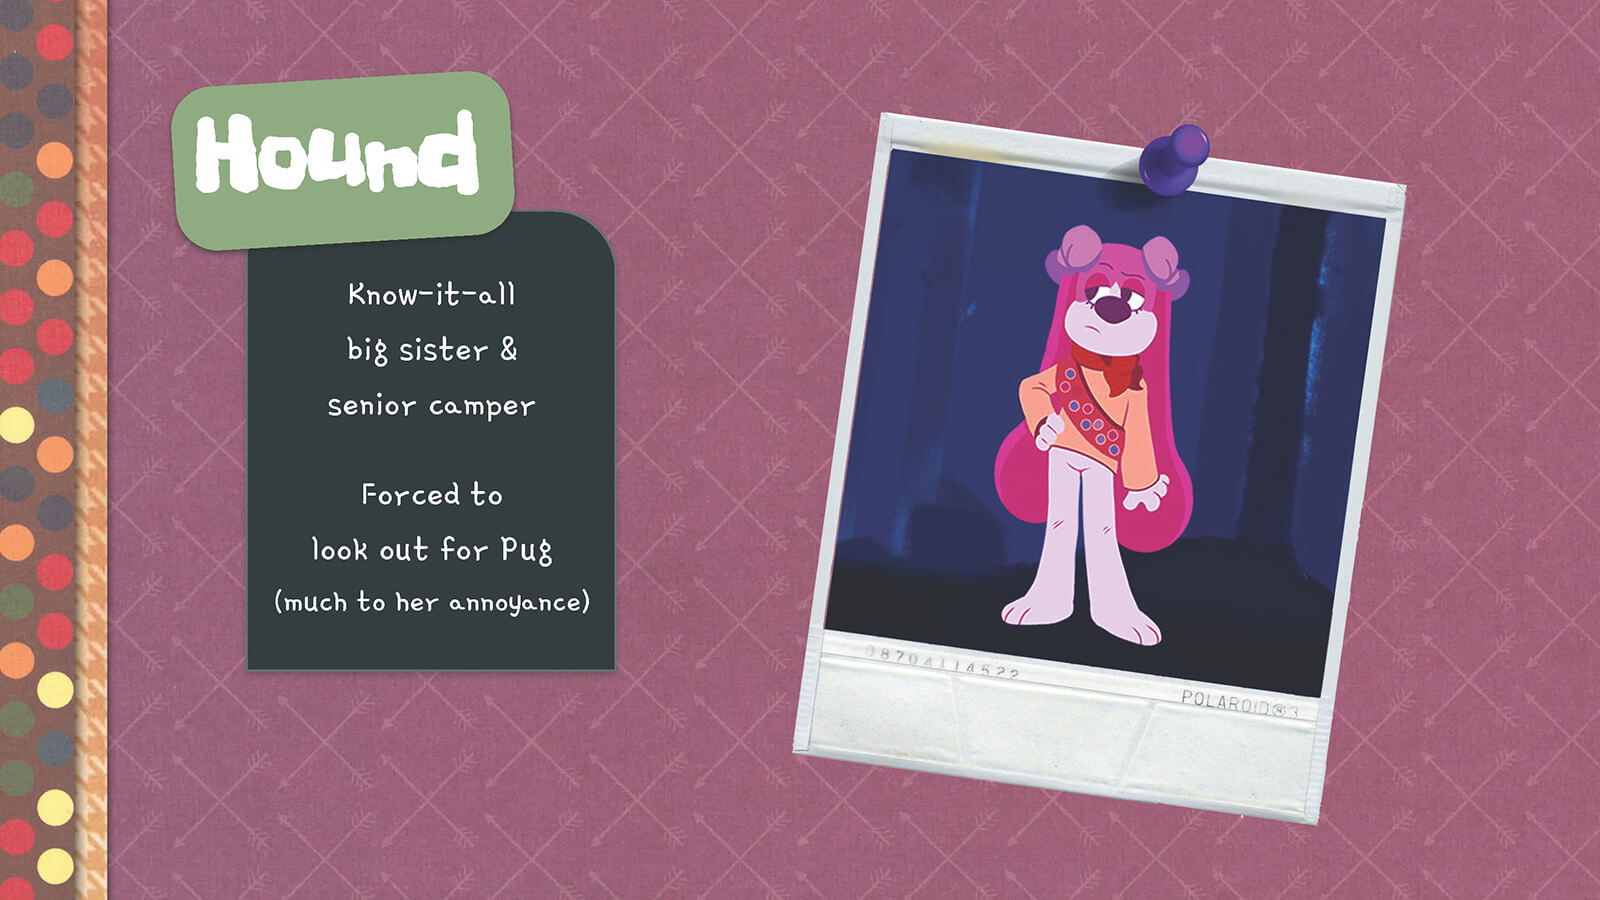 Description and look of the character Hound.